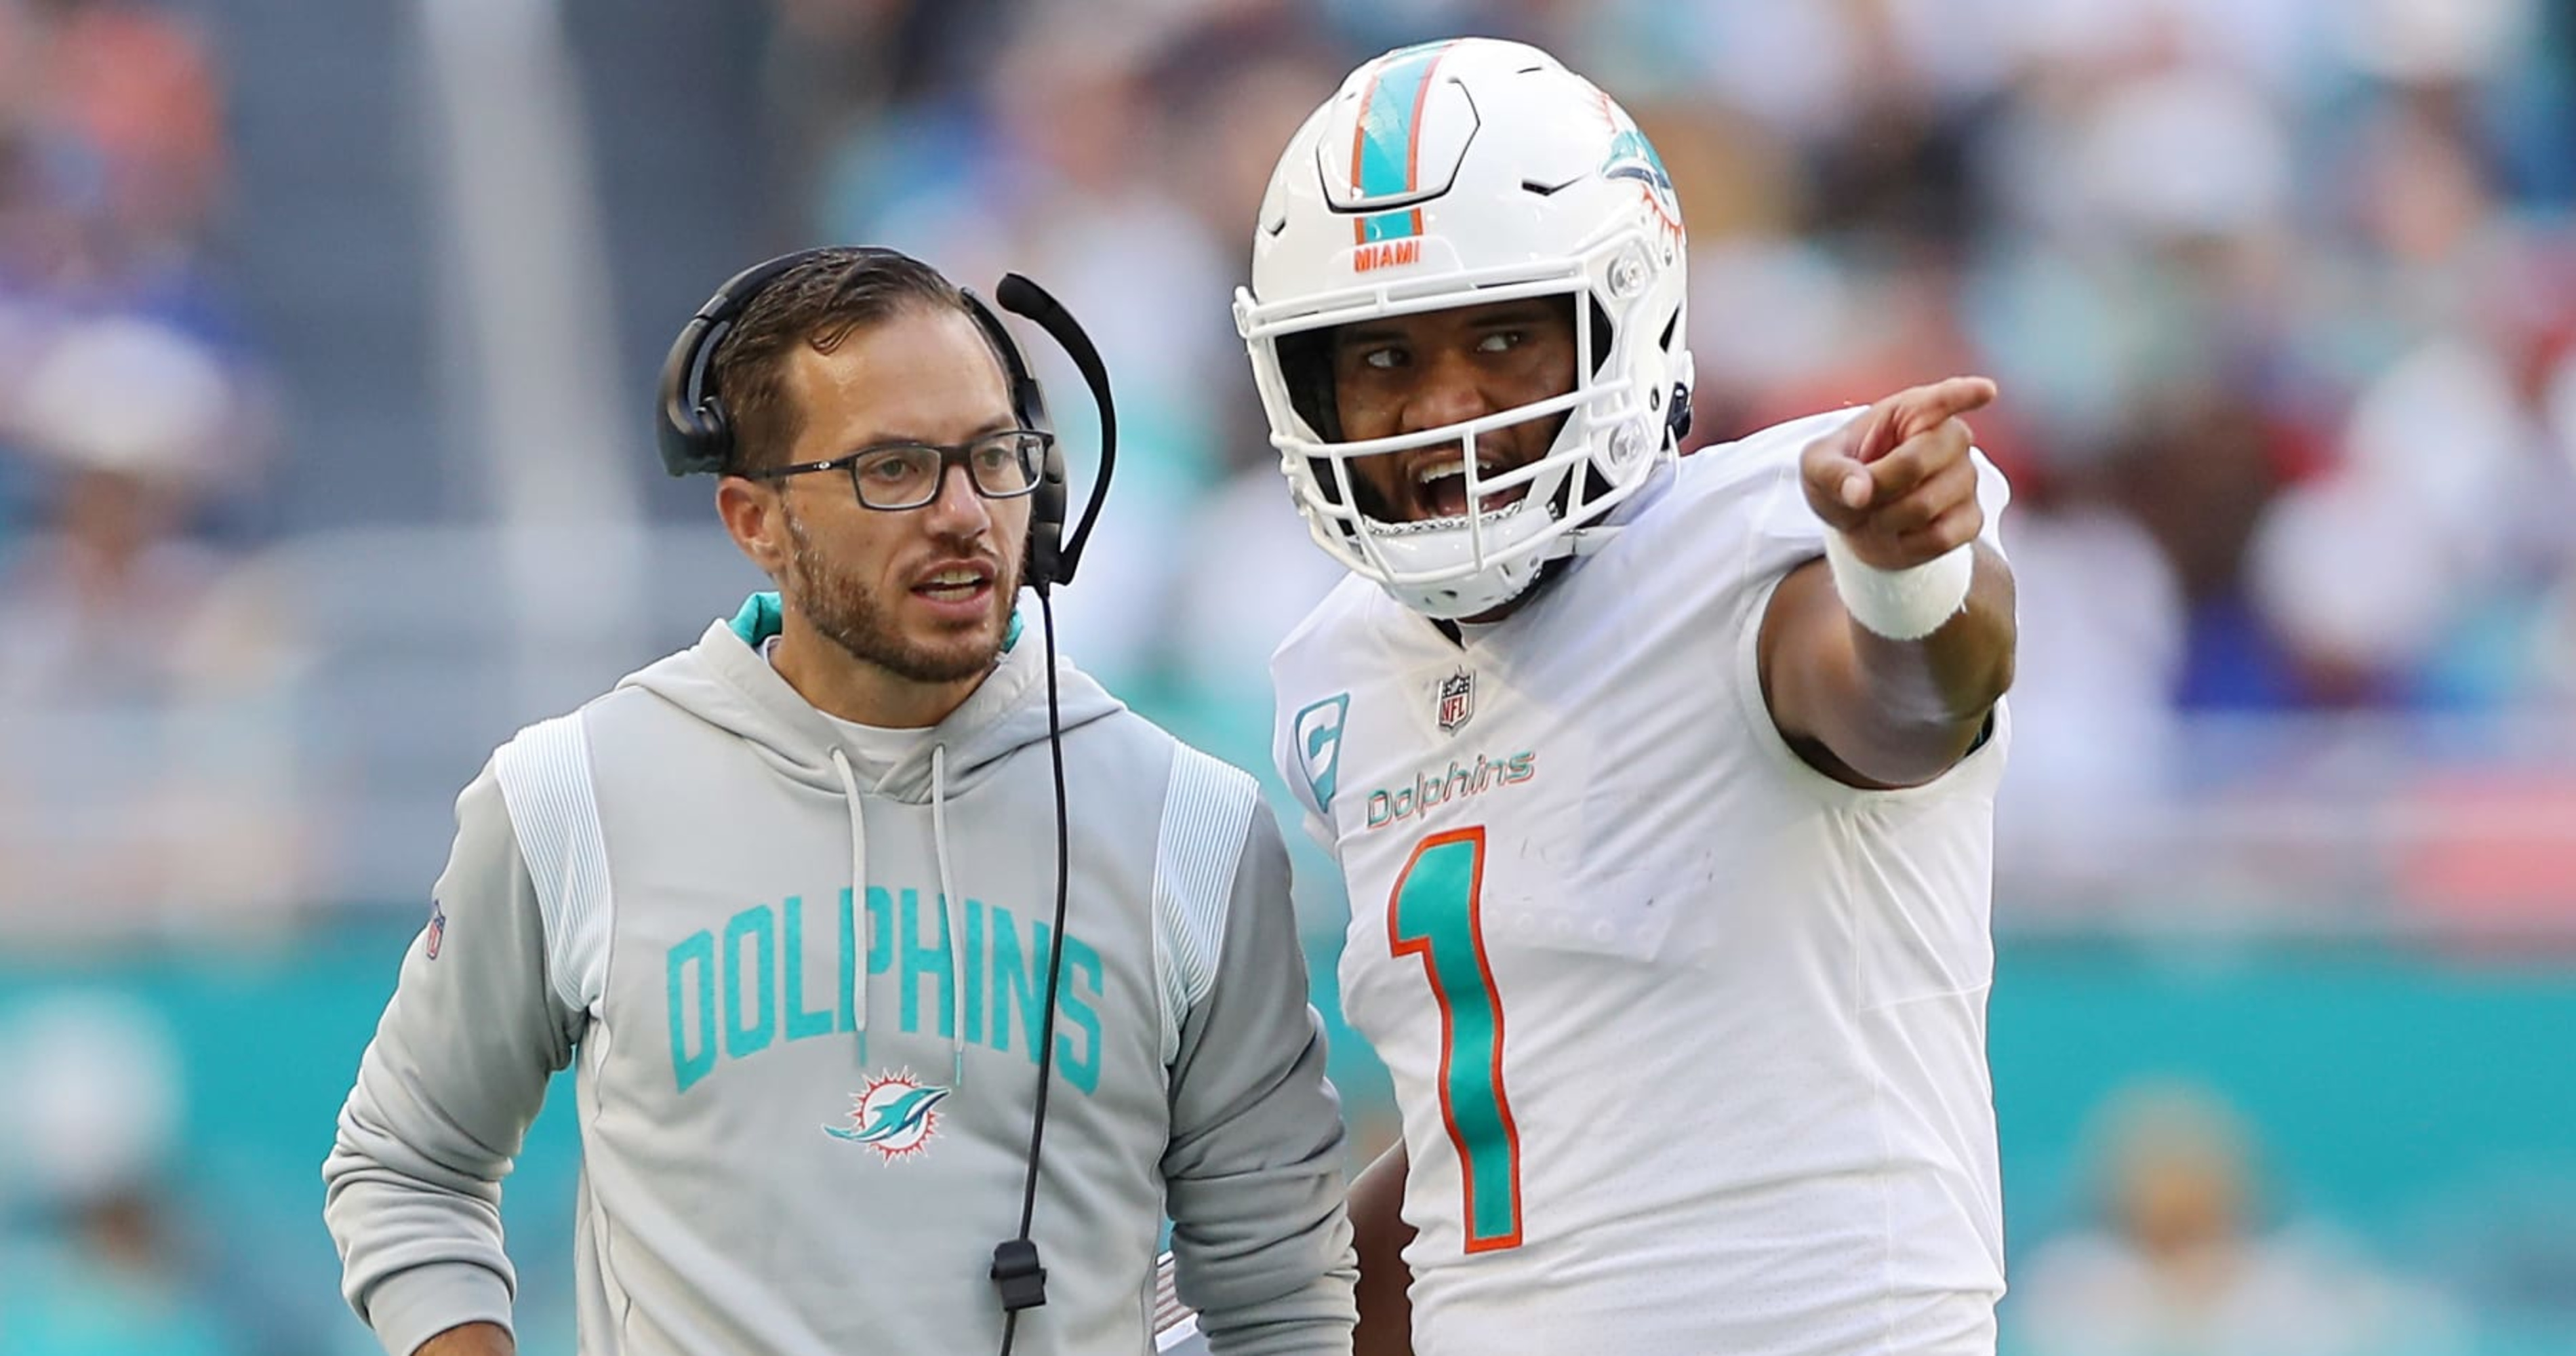 Report: Dolphins Used 12 Men on Offense After Seeing People Watching Walkthrough